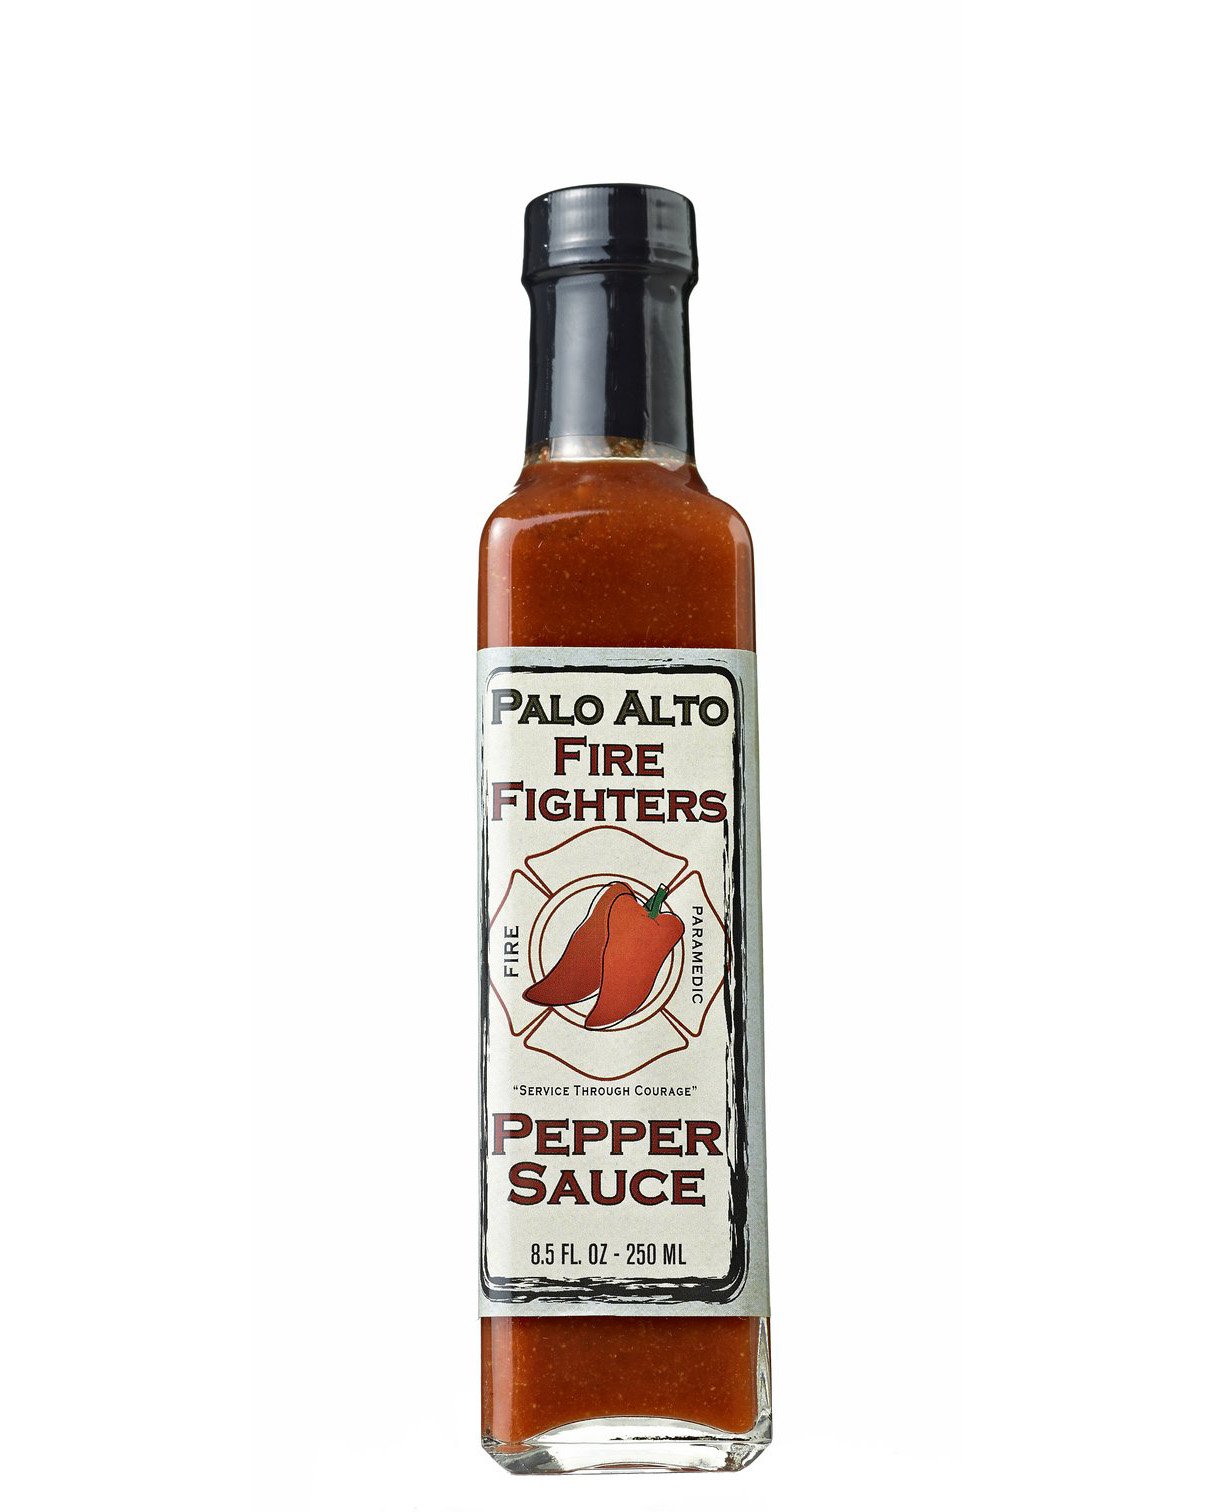 Palo alto firefighters pepper sauce review